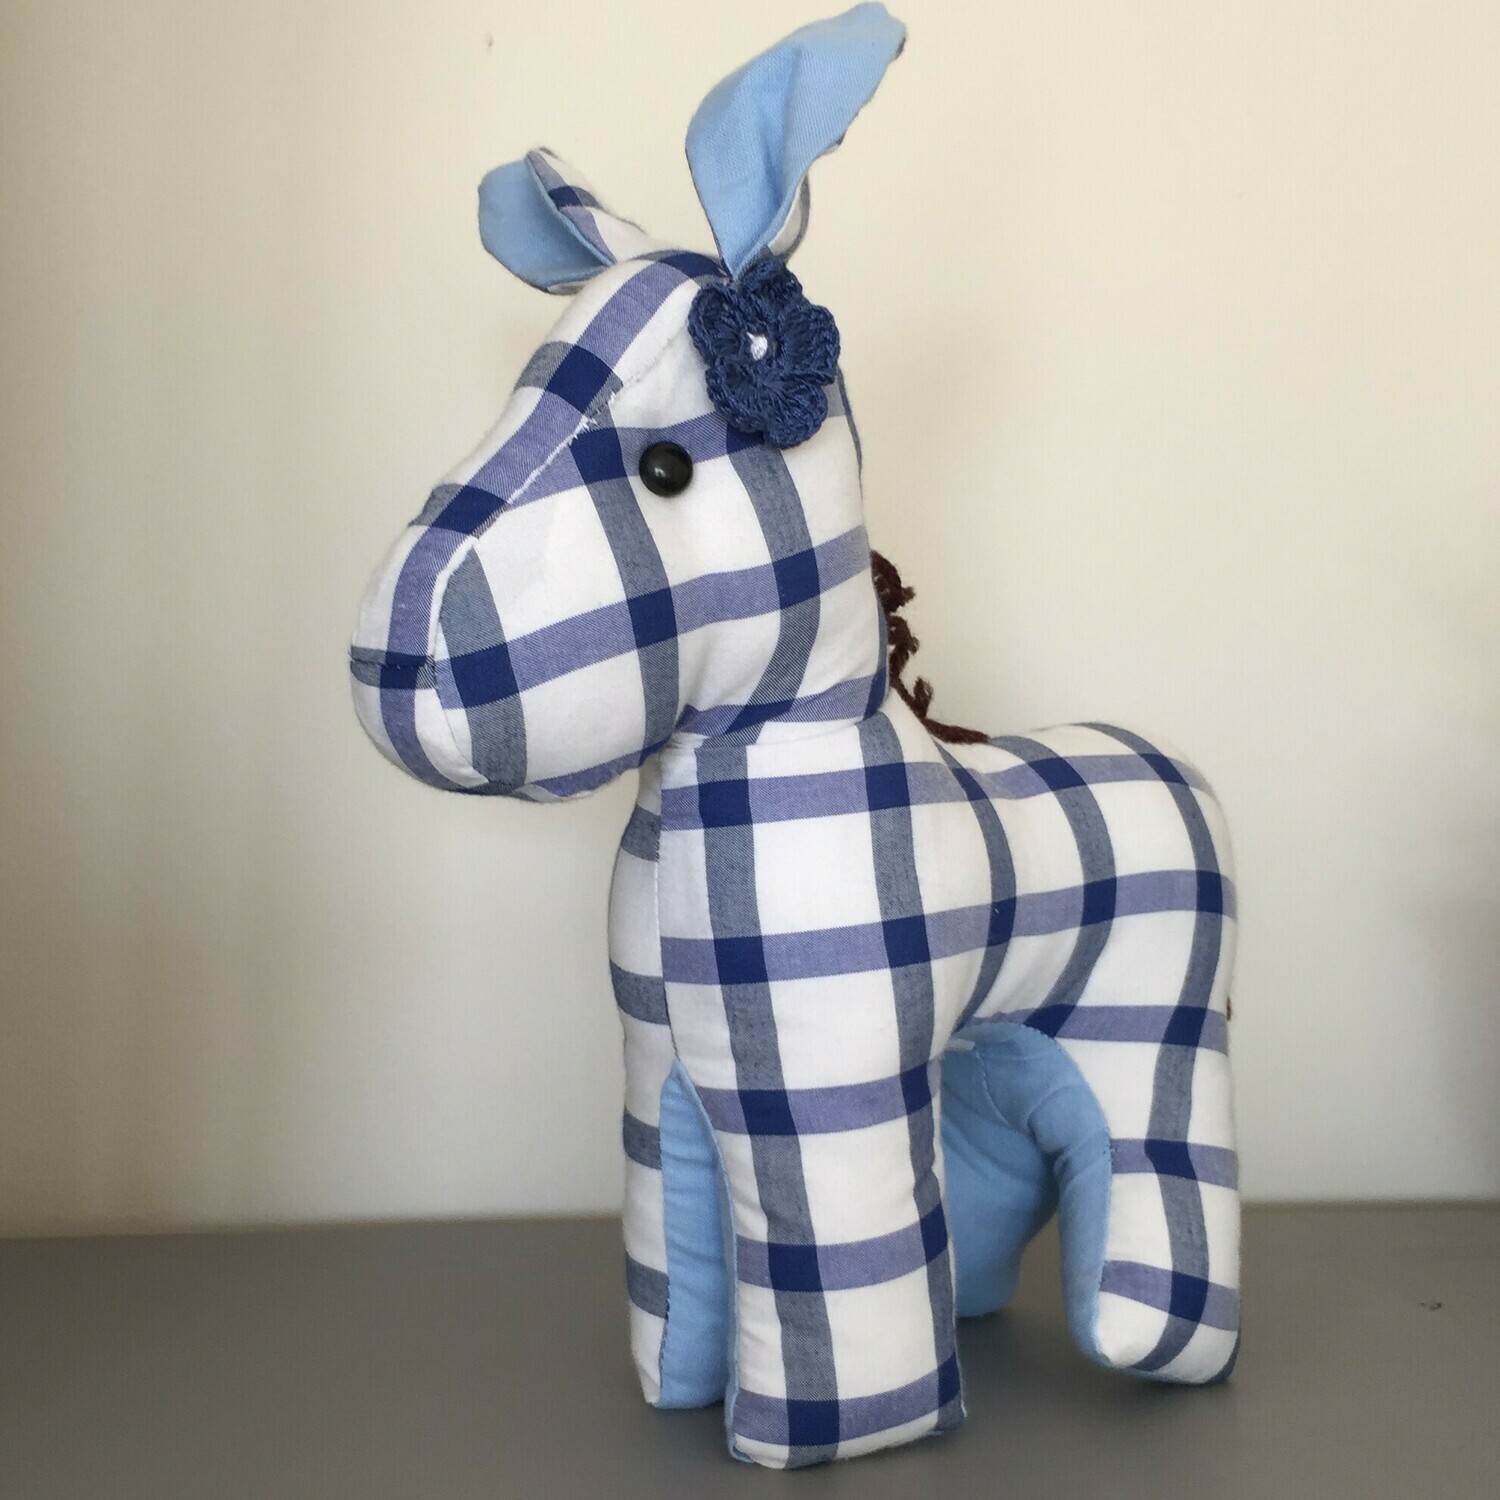 Toy: donkey in checkered navy and white